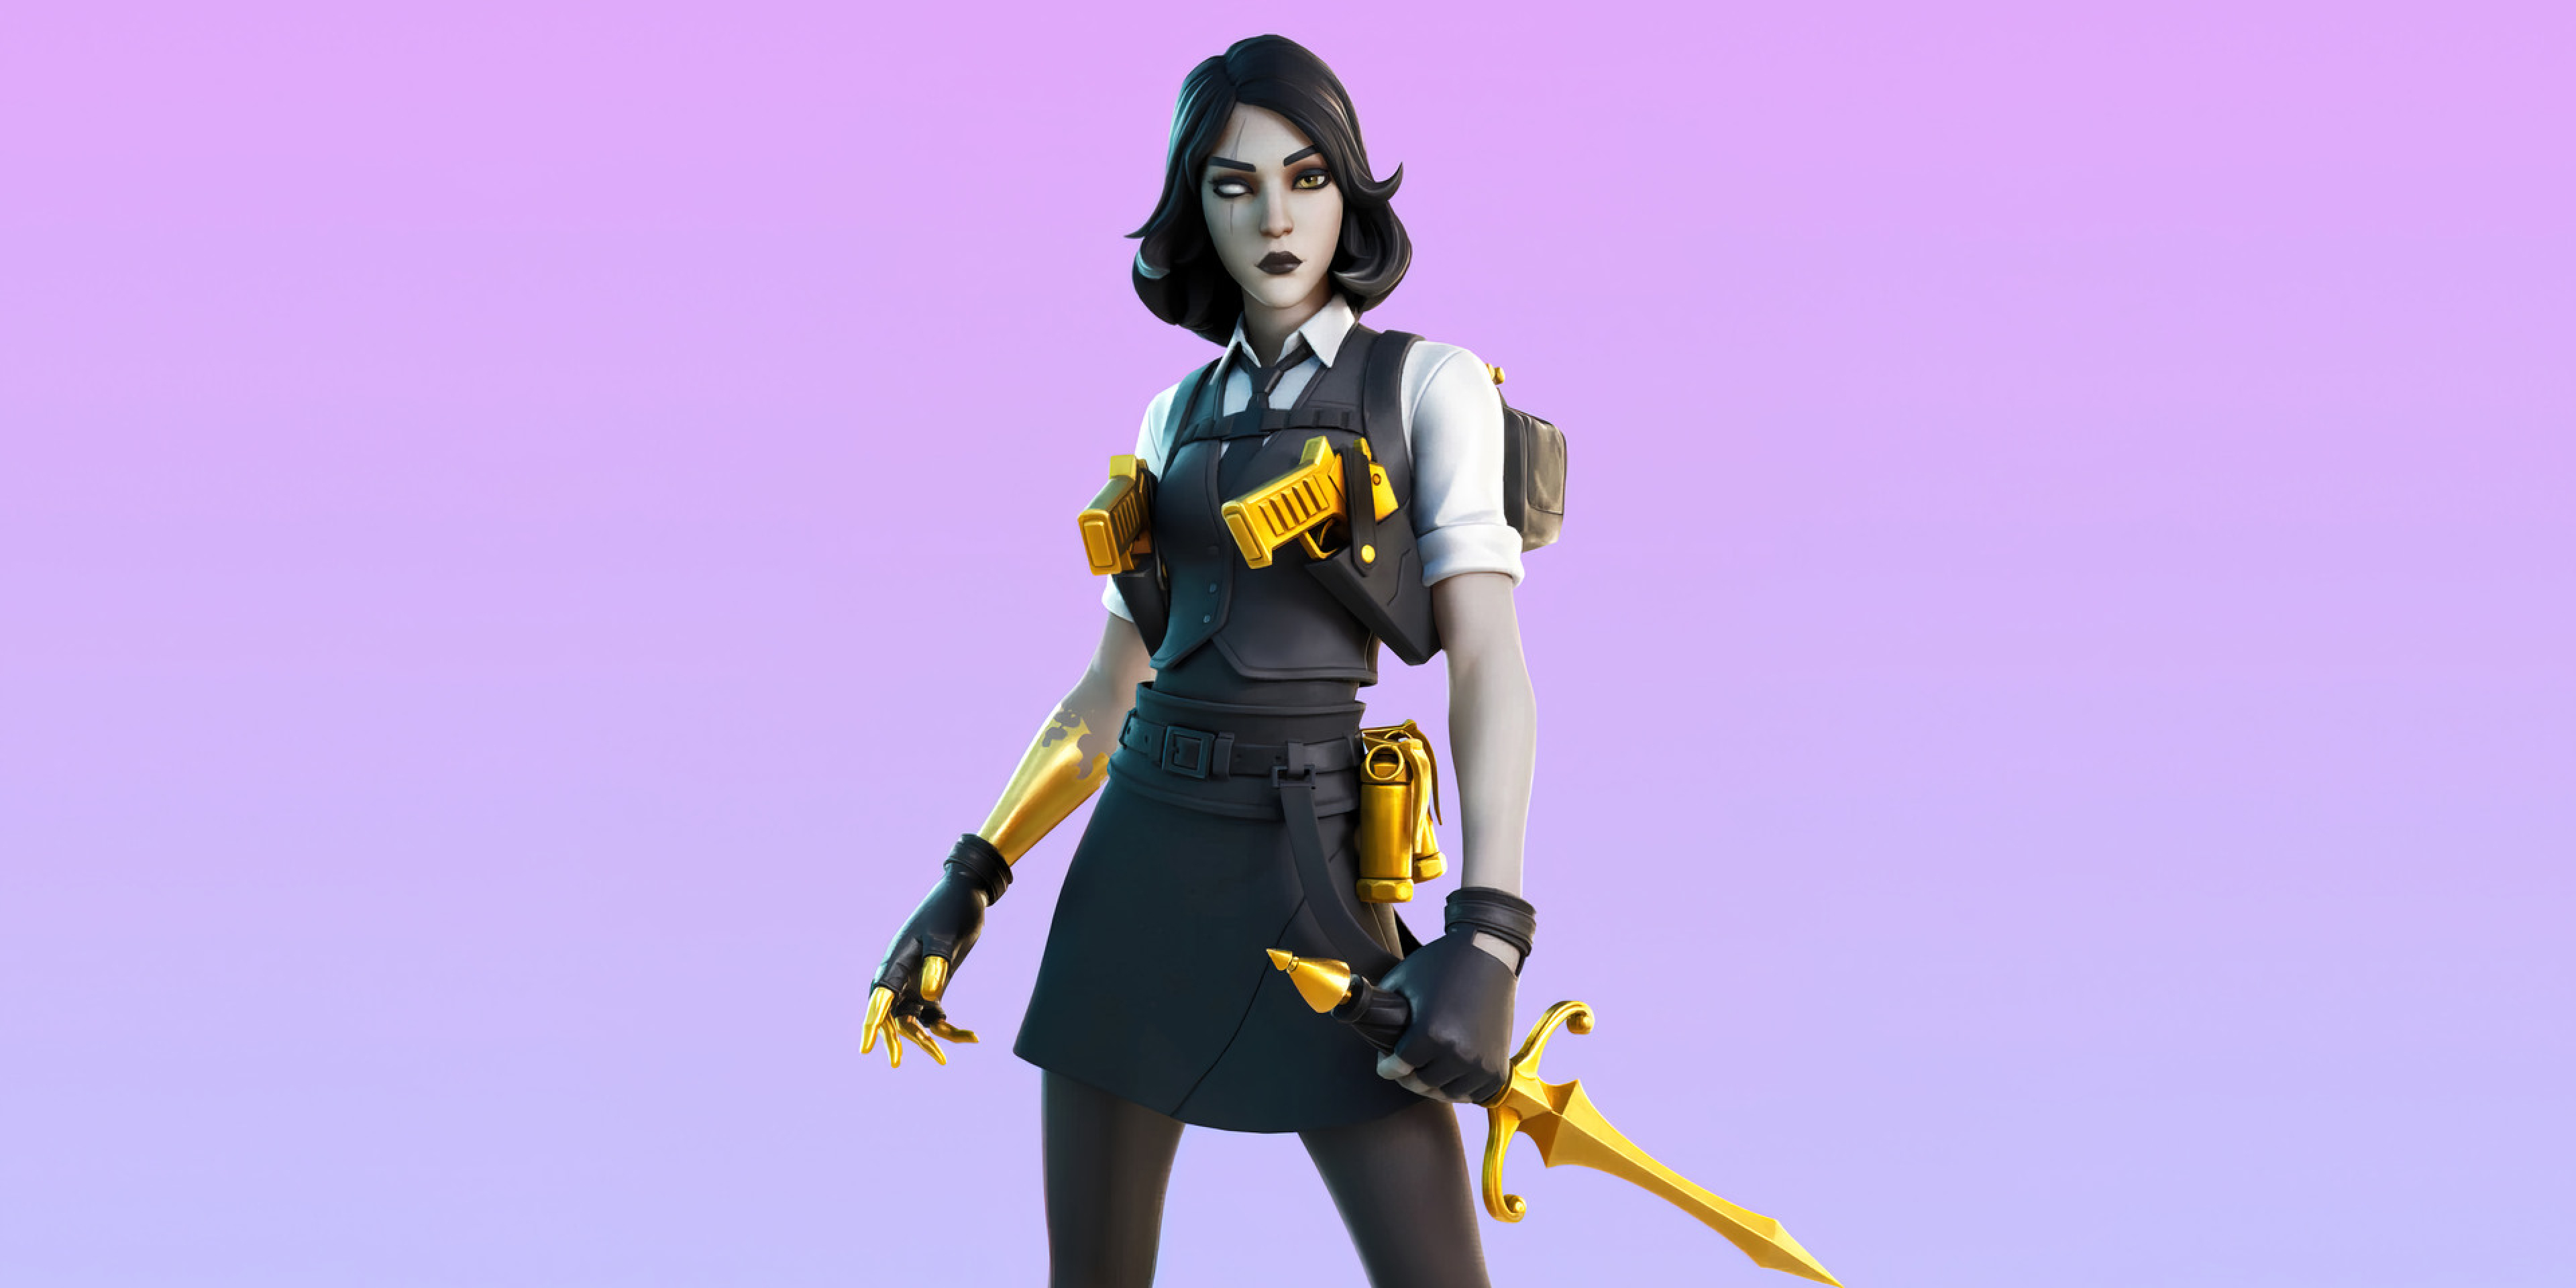 3840x1920 Fortnite Marigold Outfit Skin 3840x1920 Resolution Wallpaper ...